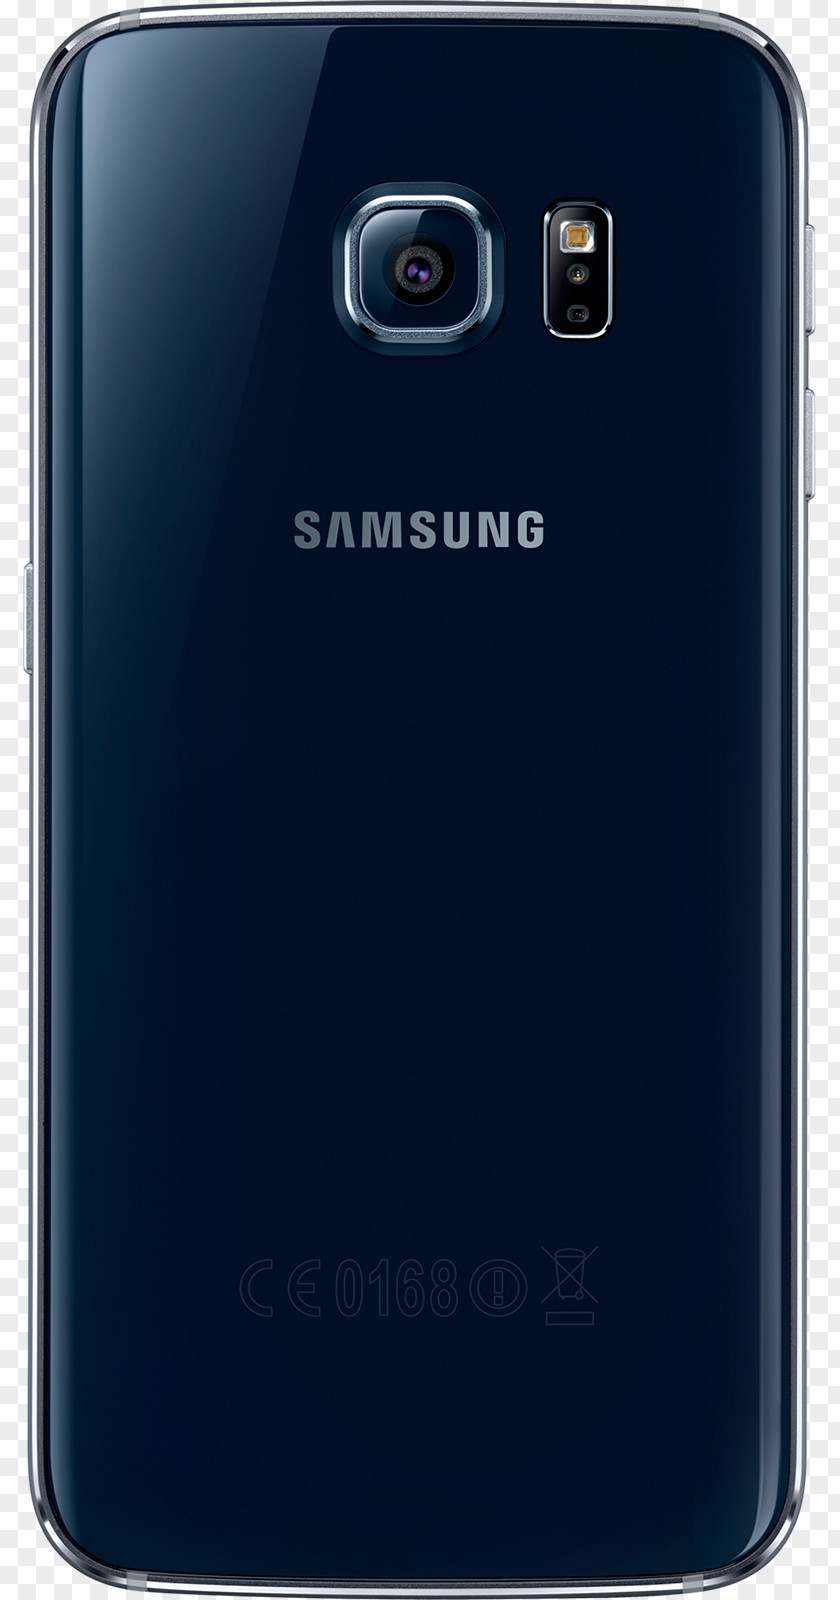 S6edga Samsung Galaxy S7 Android Telephone Smartphone PNG